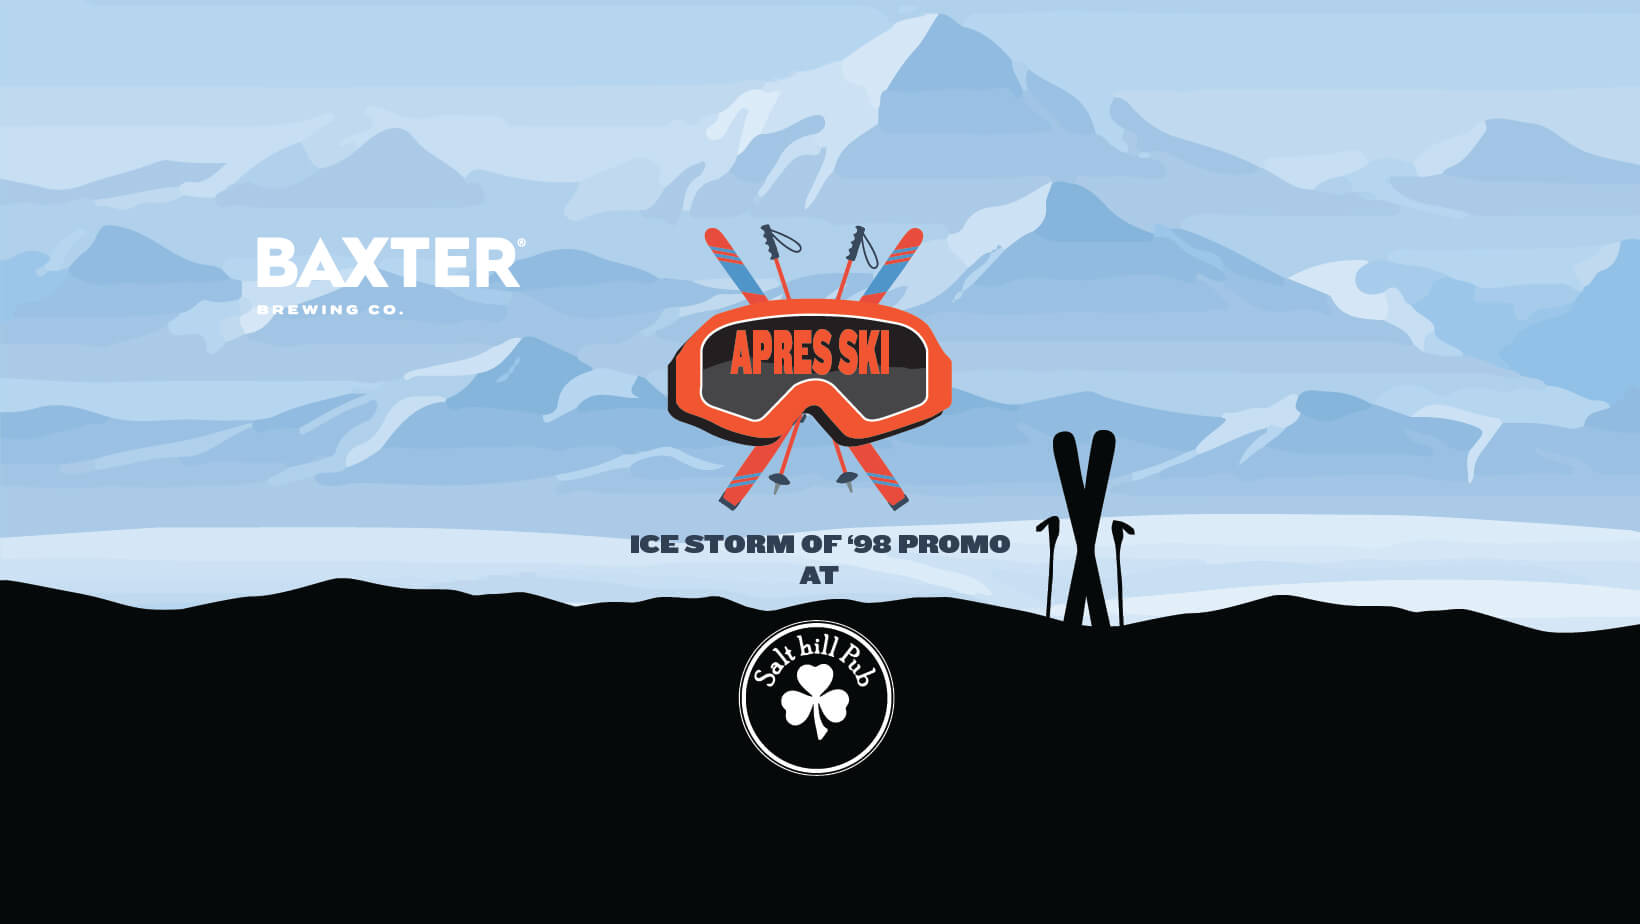 Image promoting an apres ski promo with Ice Storm of 98. On January 6th at Salt Hill Pub